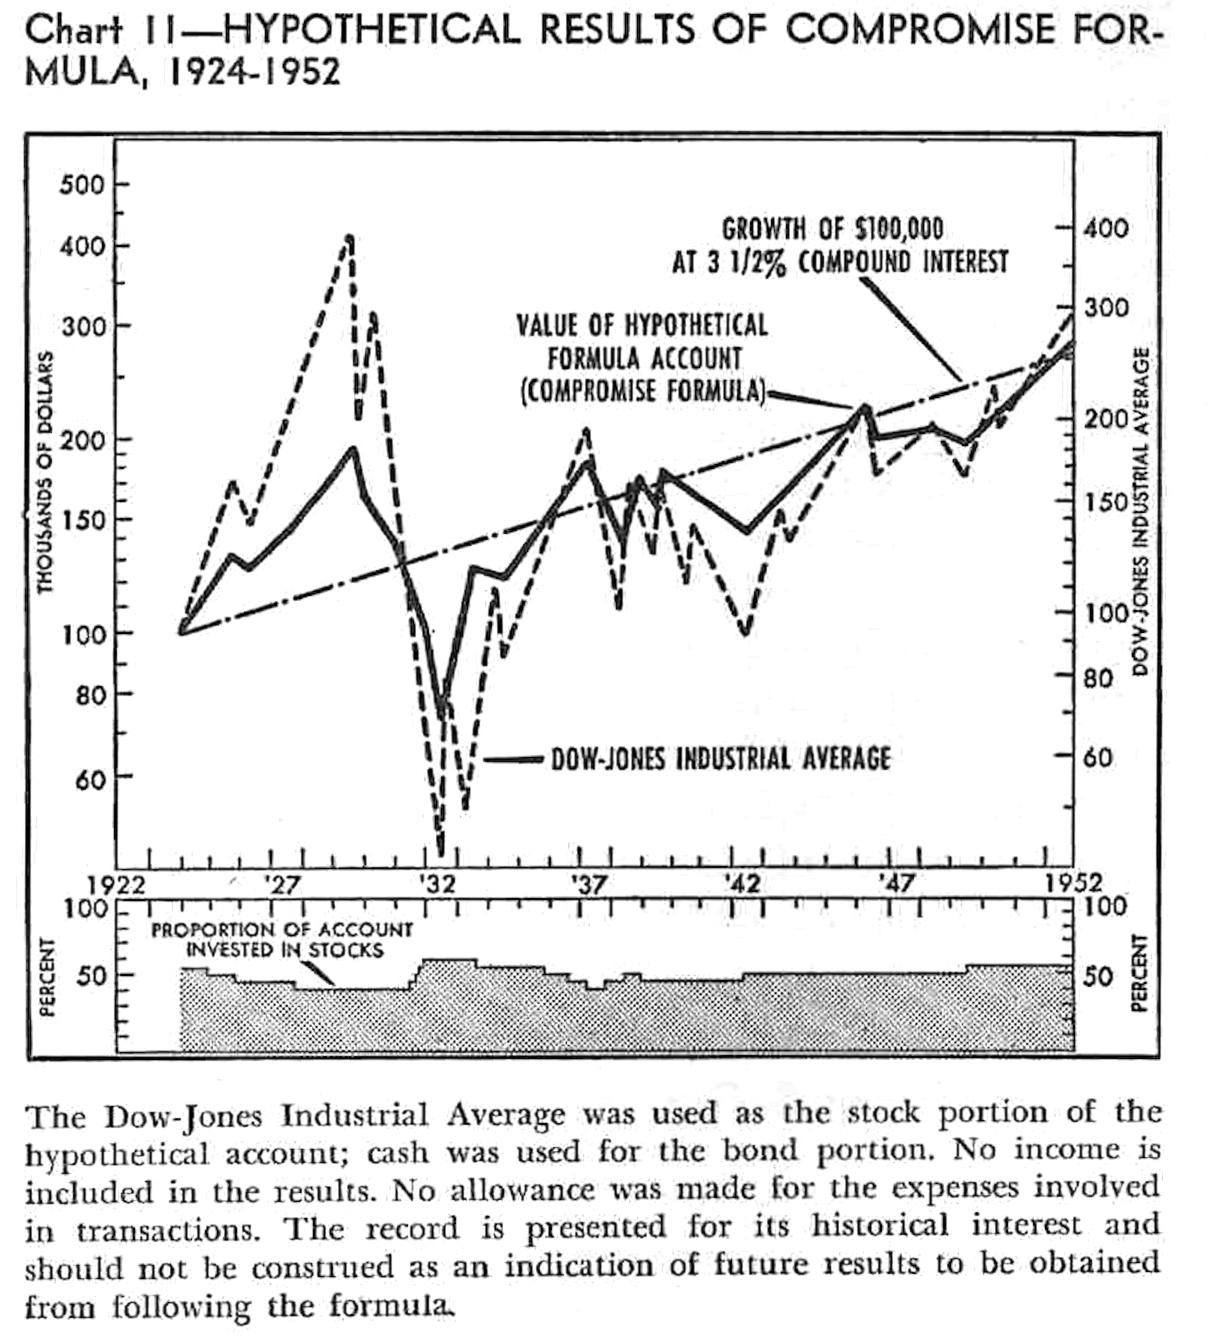 Chart 11 from page 237 of Lucile Tomlinson (1953) _Practical Formulas for Successful Investing_